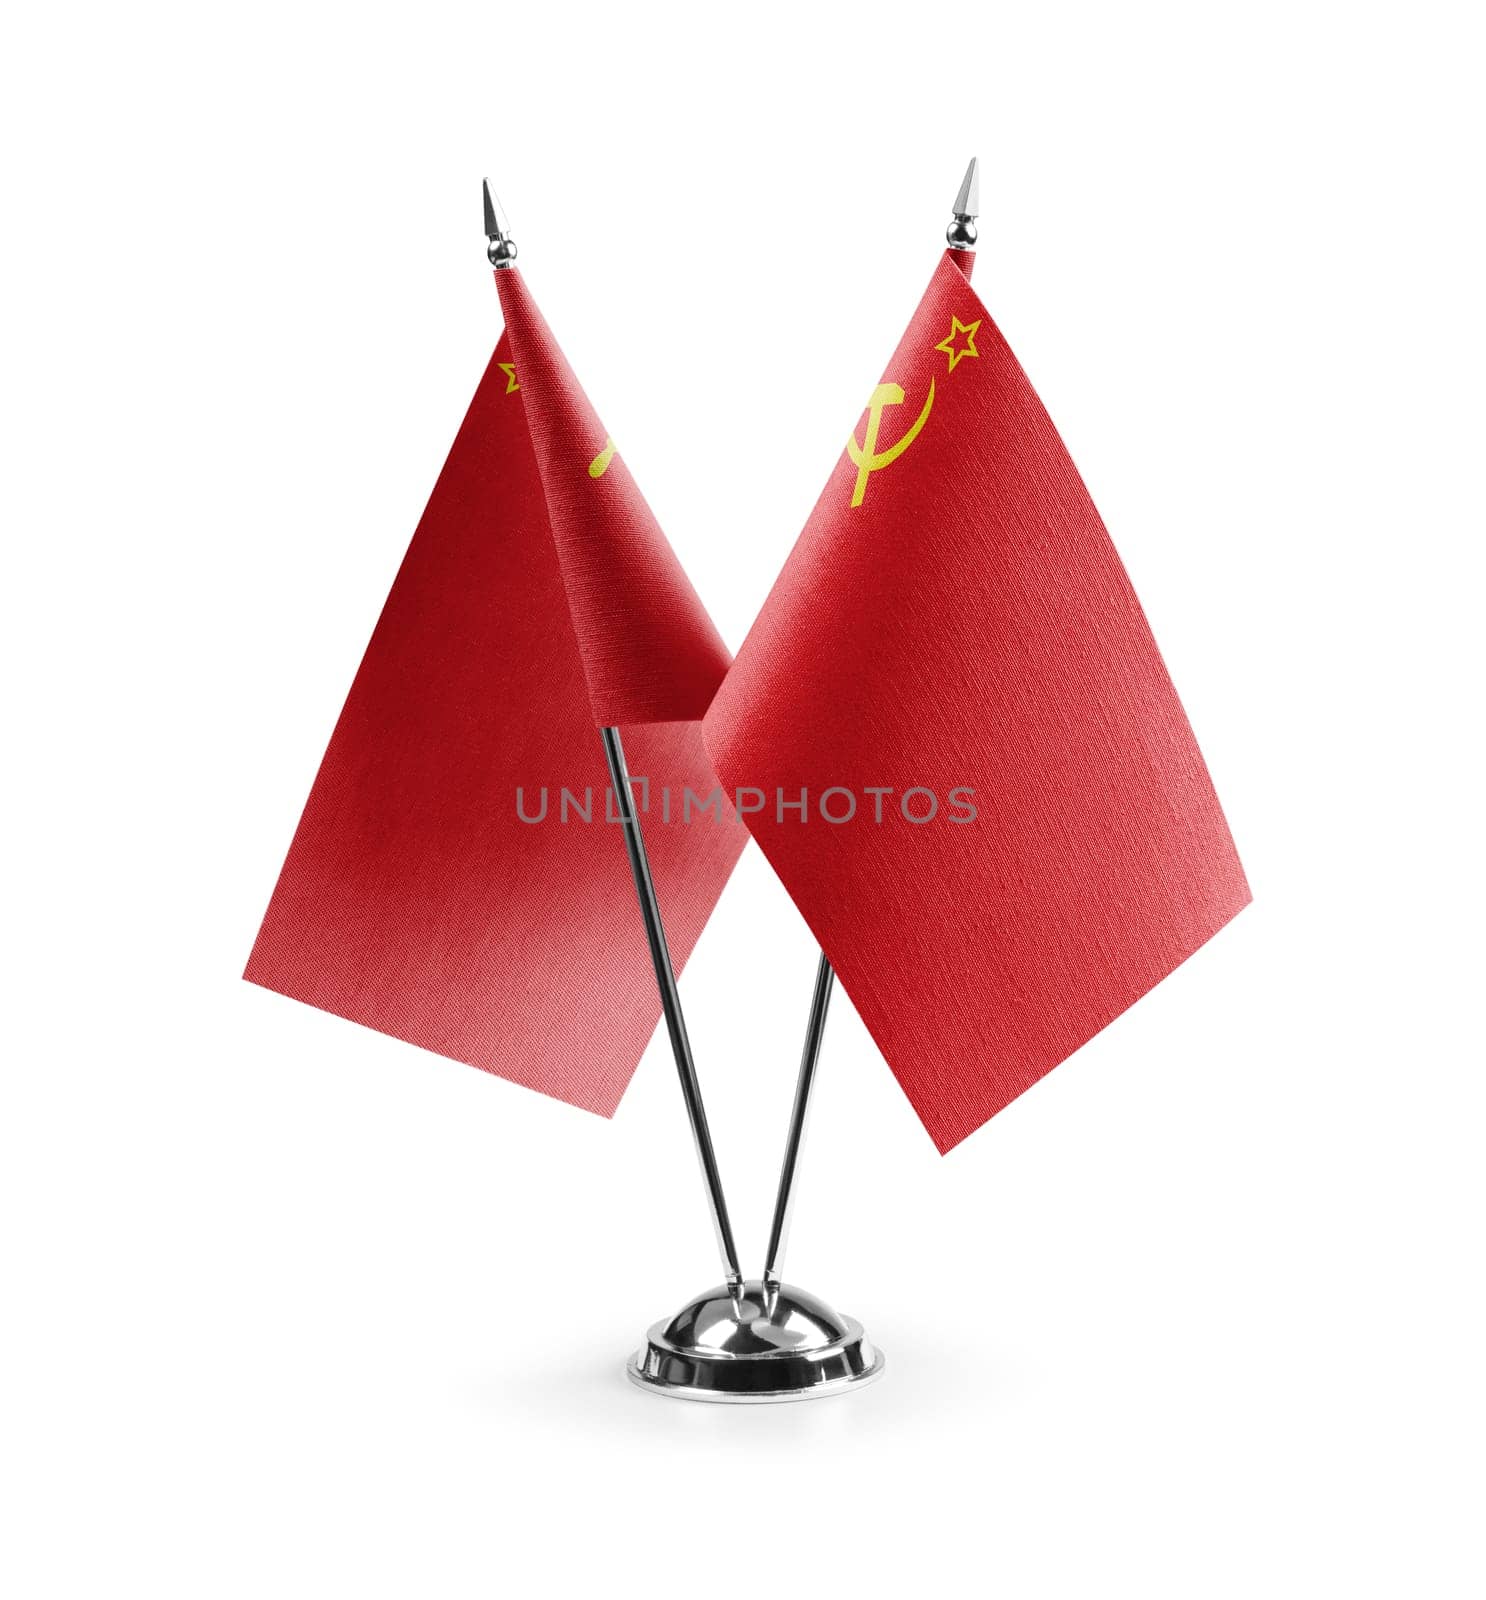 Small national flags of the USSR on a white background.